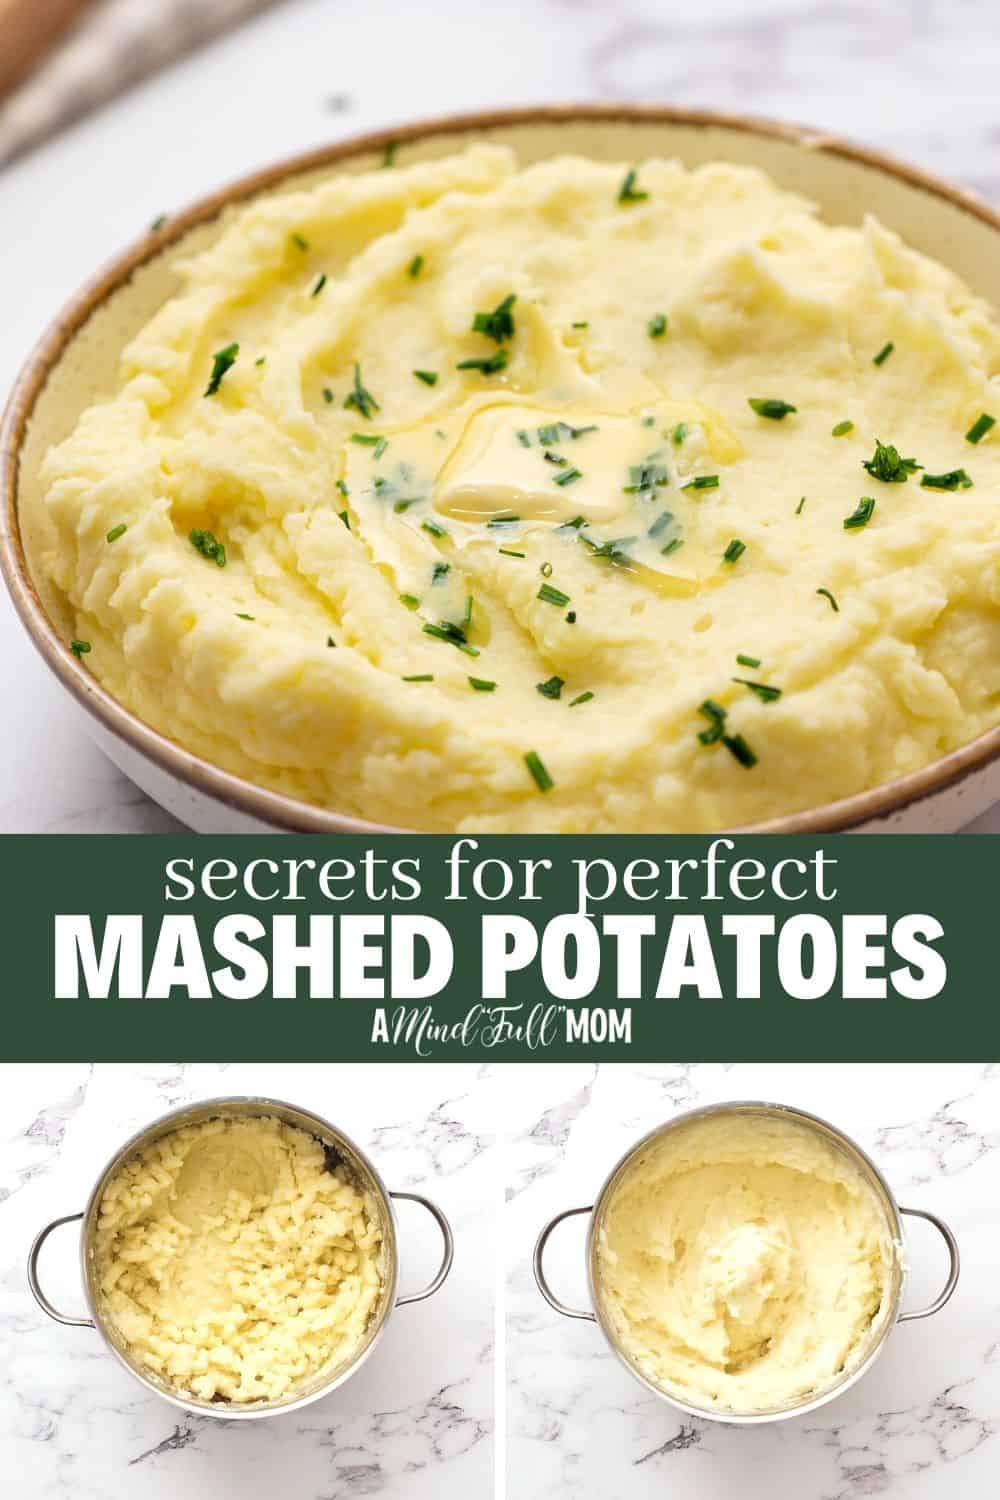 Are you looking for creamy, light, fluffy mashed potatoes? Grab these 5 tips and you are guaranteed to have perfect mashed potatoes. This is the recipe you need for the creamiest, dreamiest mashed potatoes! Perfect for holiday meals and of just a family dinner.